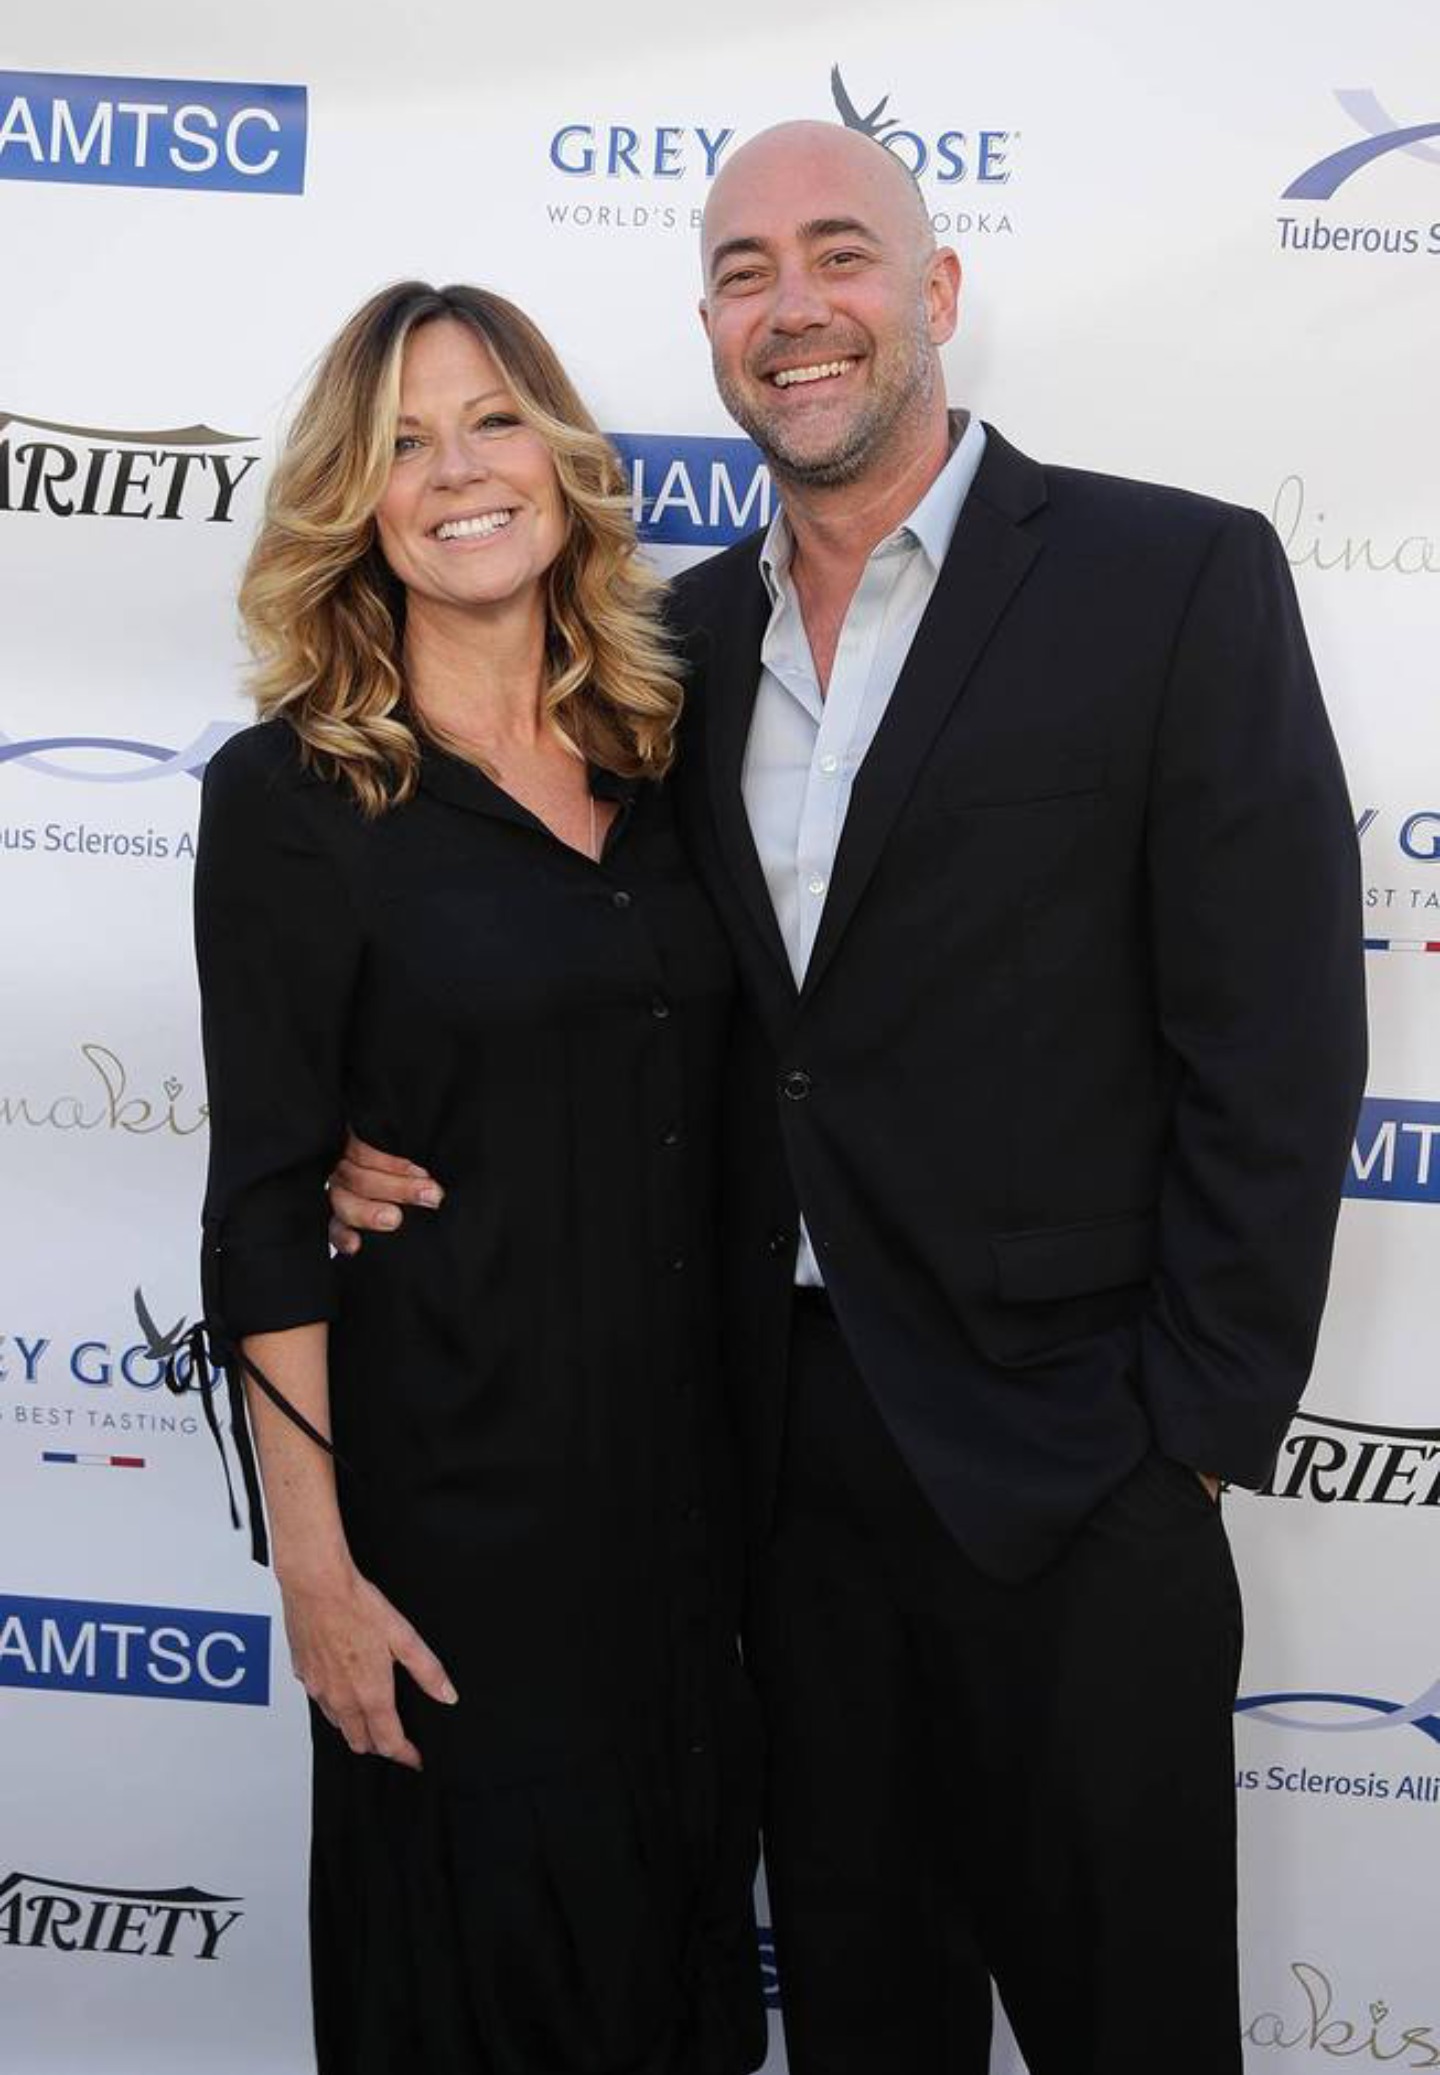 Hosts of Comedy For A Cure 2015 at Universal Studios' Globe Theatre. Alex Skuby and wife, Mo Collins. April 12th, 2015.